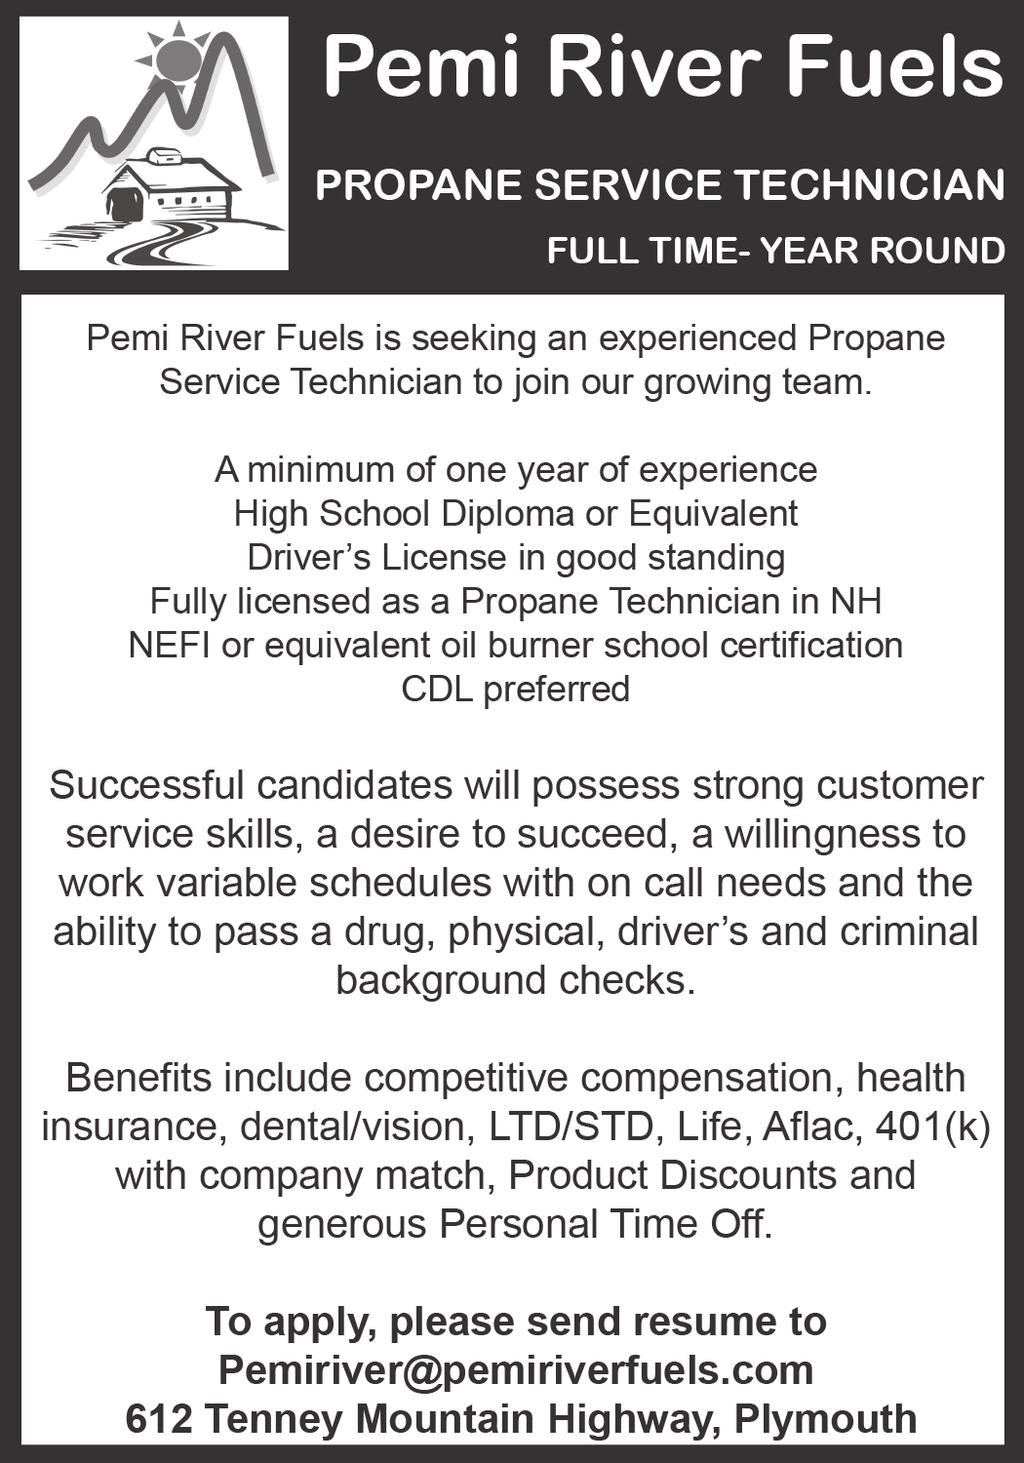 APPLY IN PERSON 186 NORTH MAIN ST, PLYMOUTH NH OR EMAIL RESUME: KIRKSTIRE@ROADRUNNER.COM PLEASE NO PHONE CALLS.